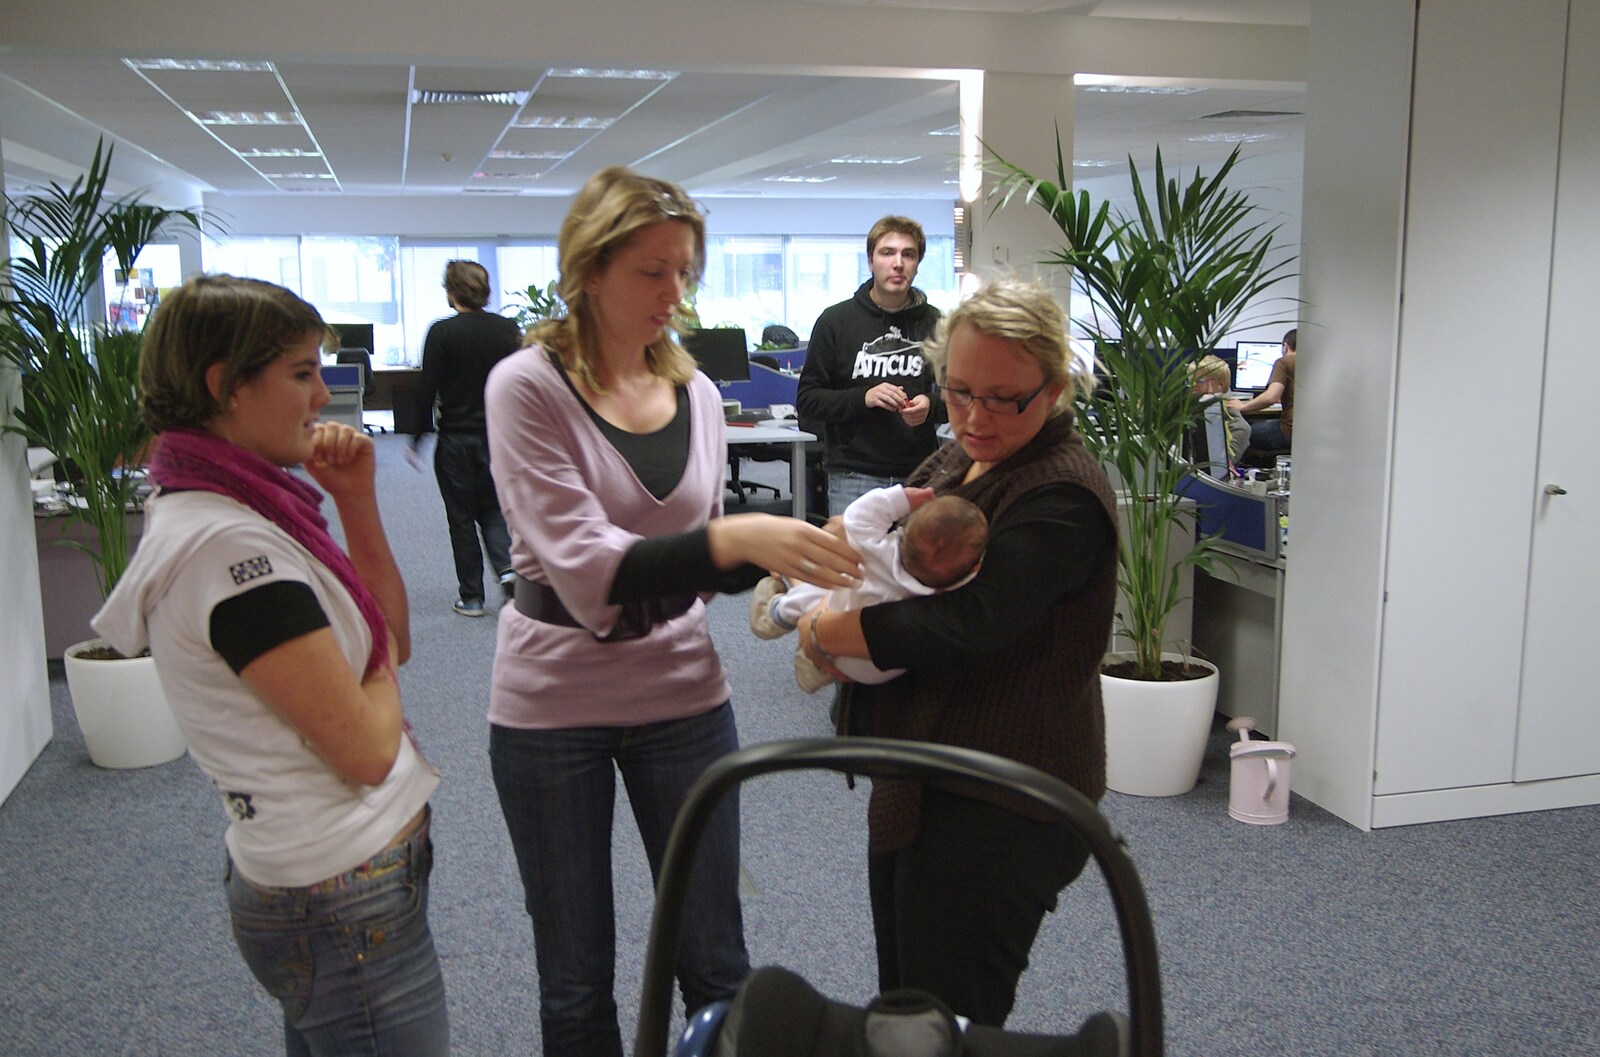 Fred's Further Adventures, Ward Road, Cambridge - 10th October 2008: In Taptu's offices, Rosie, Lindsey and Michelle have a go